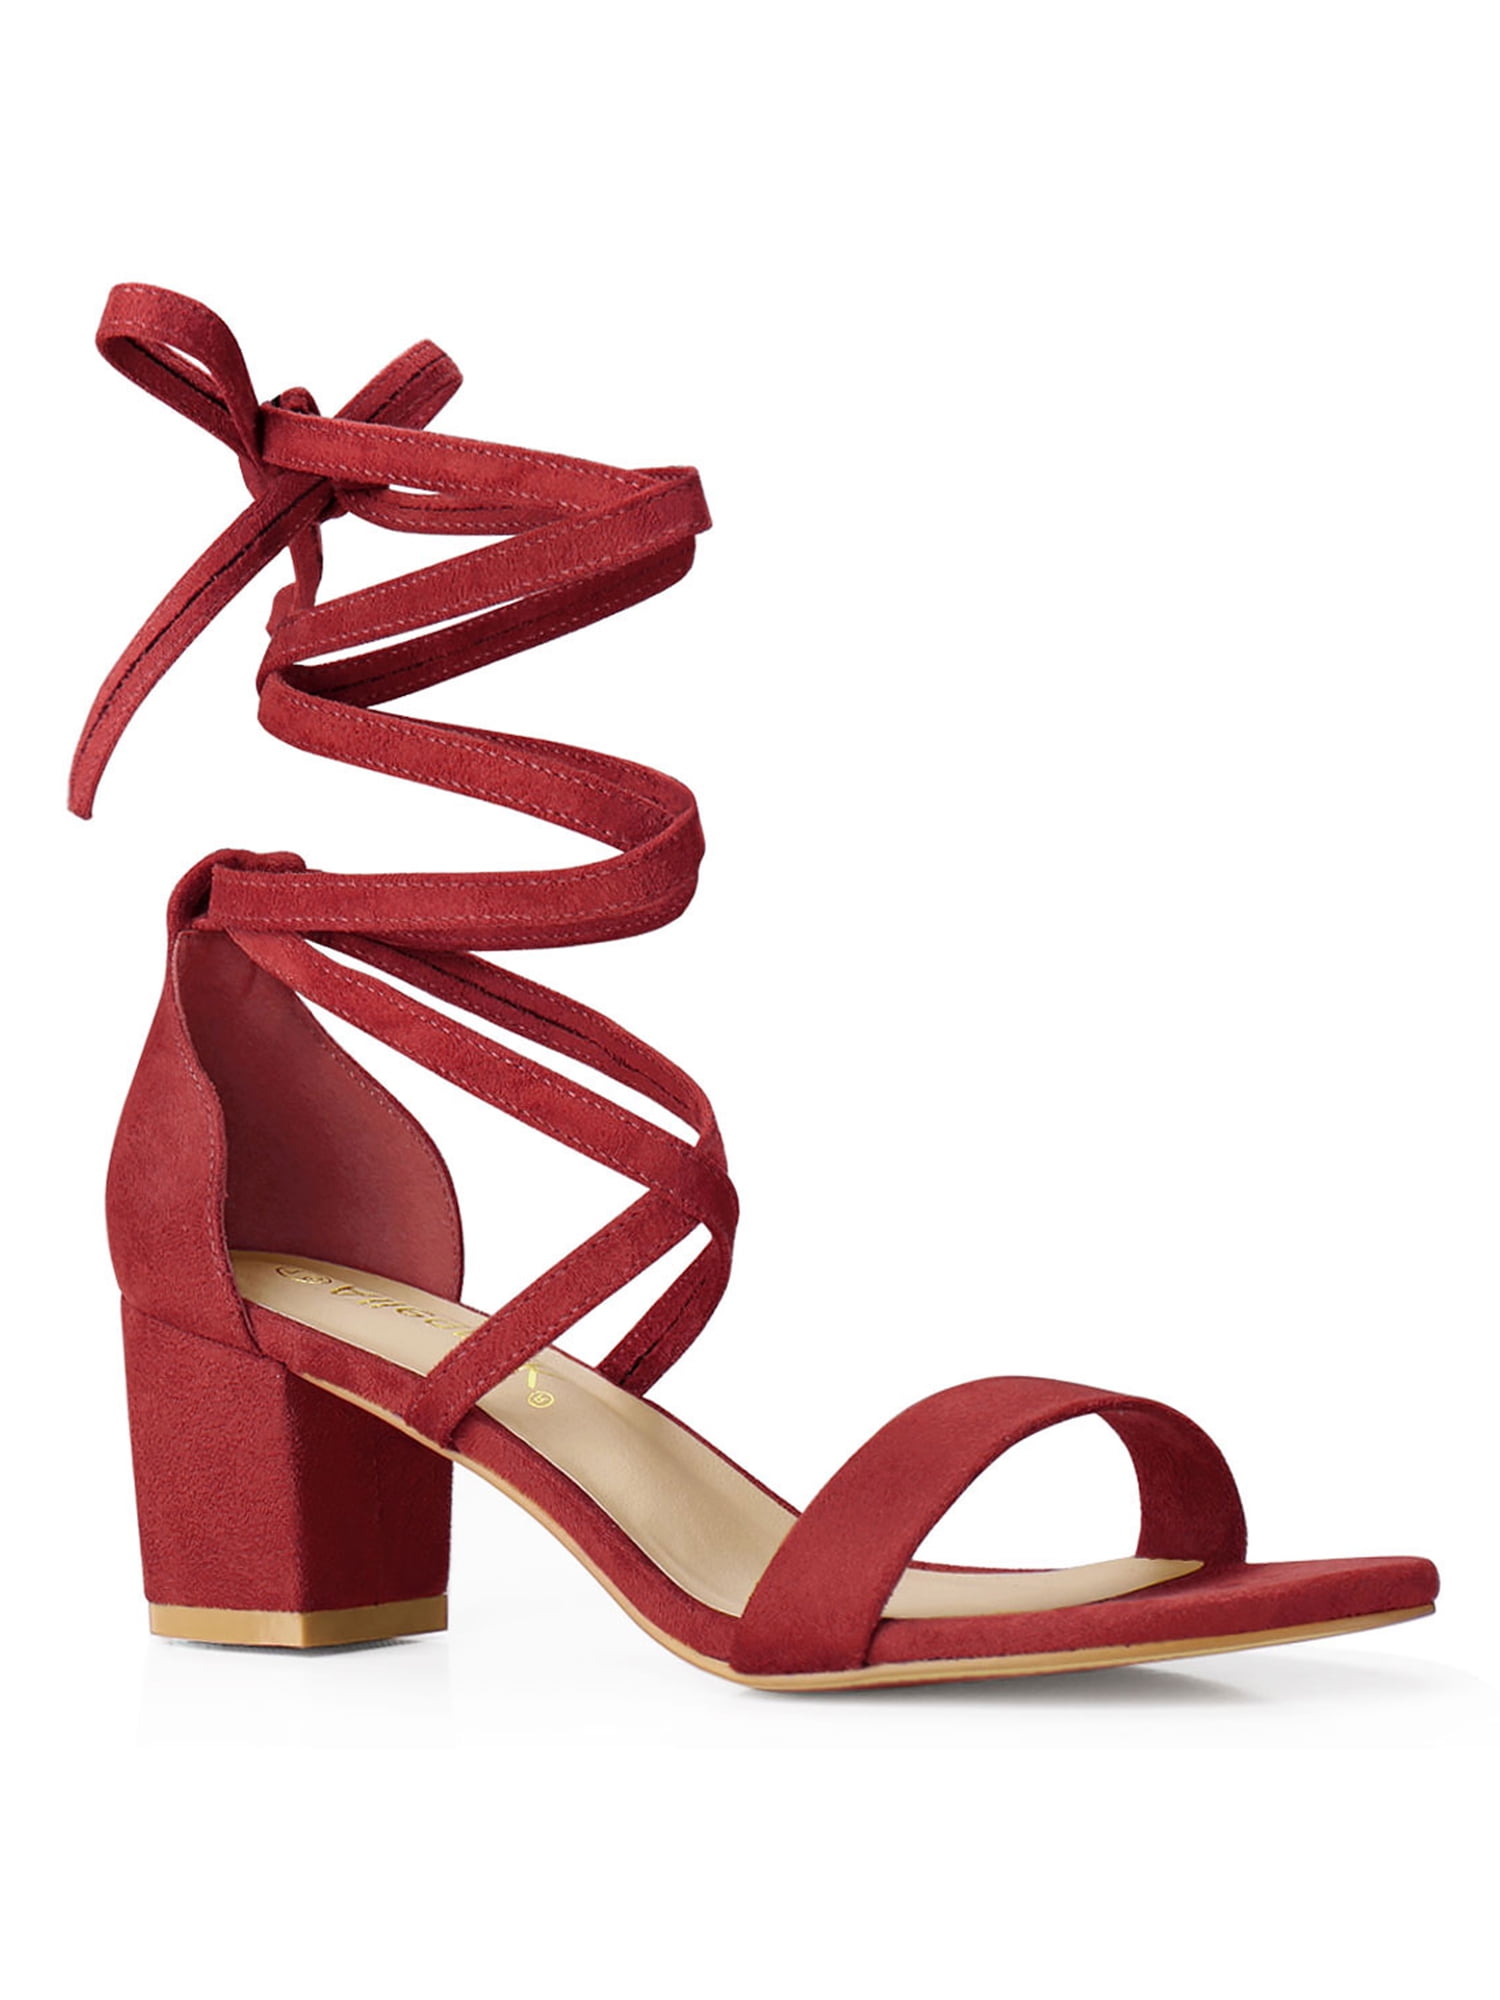 Women's Chunky Heels Strappy High Heeled Sandals Open Toe Ankle Strap Comfy  Party Dress Shoes for Wedding,COCO-RED SUEDE-9, Red, 9 : Amazon.ca:  Clothing, Shoes & Accessories